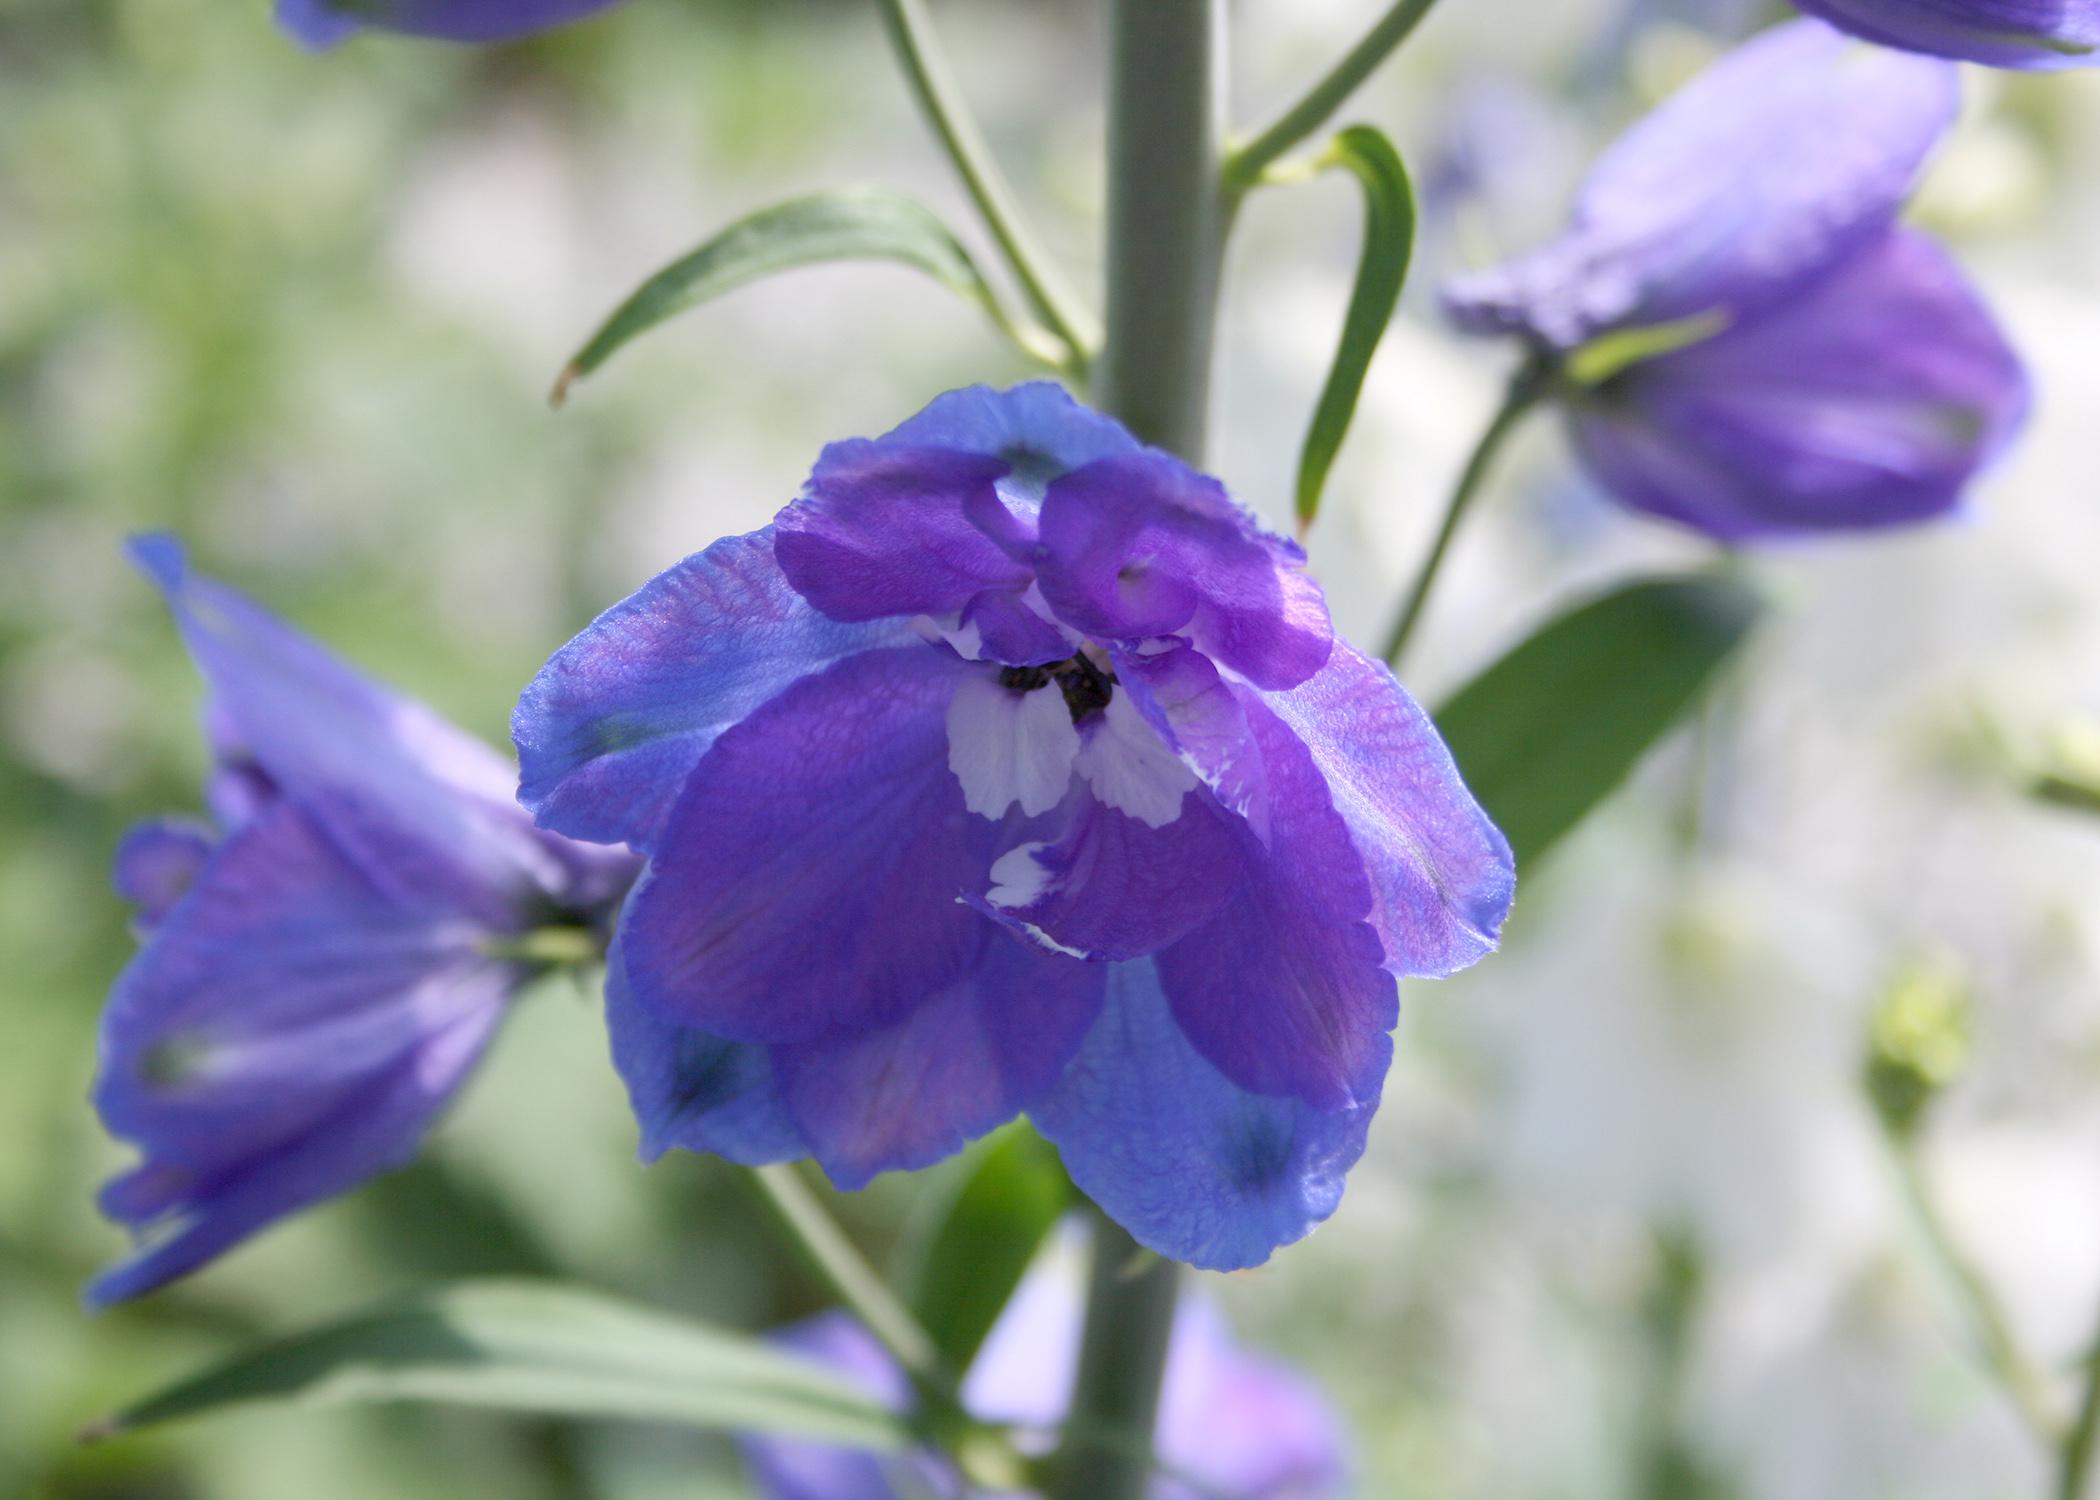 Delphinium is a garden classic with iridescent blue flowers on long spikes, but it must be planted from November to early February. (Photo by MSU Extension Service/Gary Bachman)